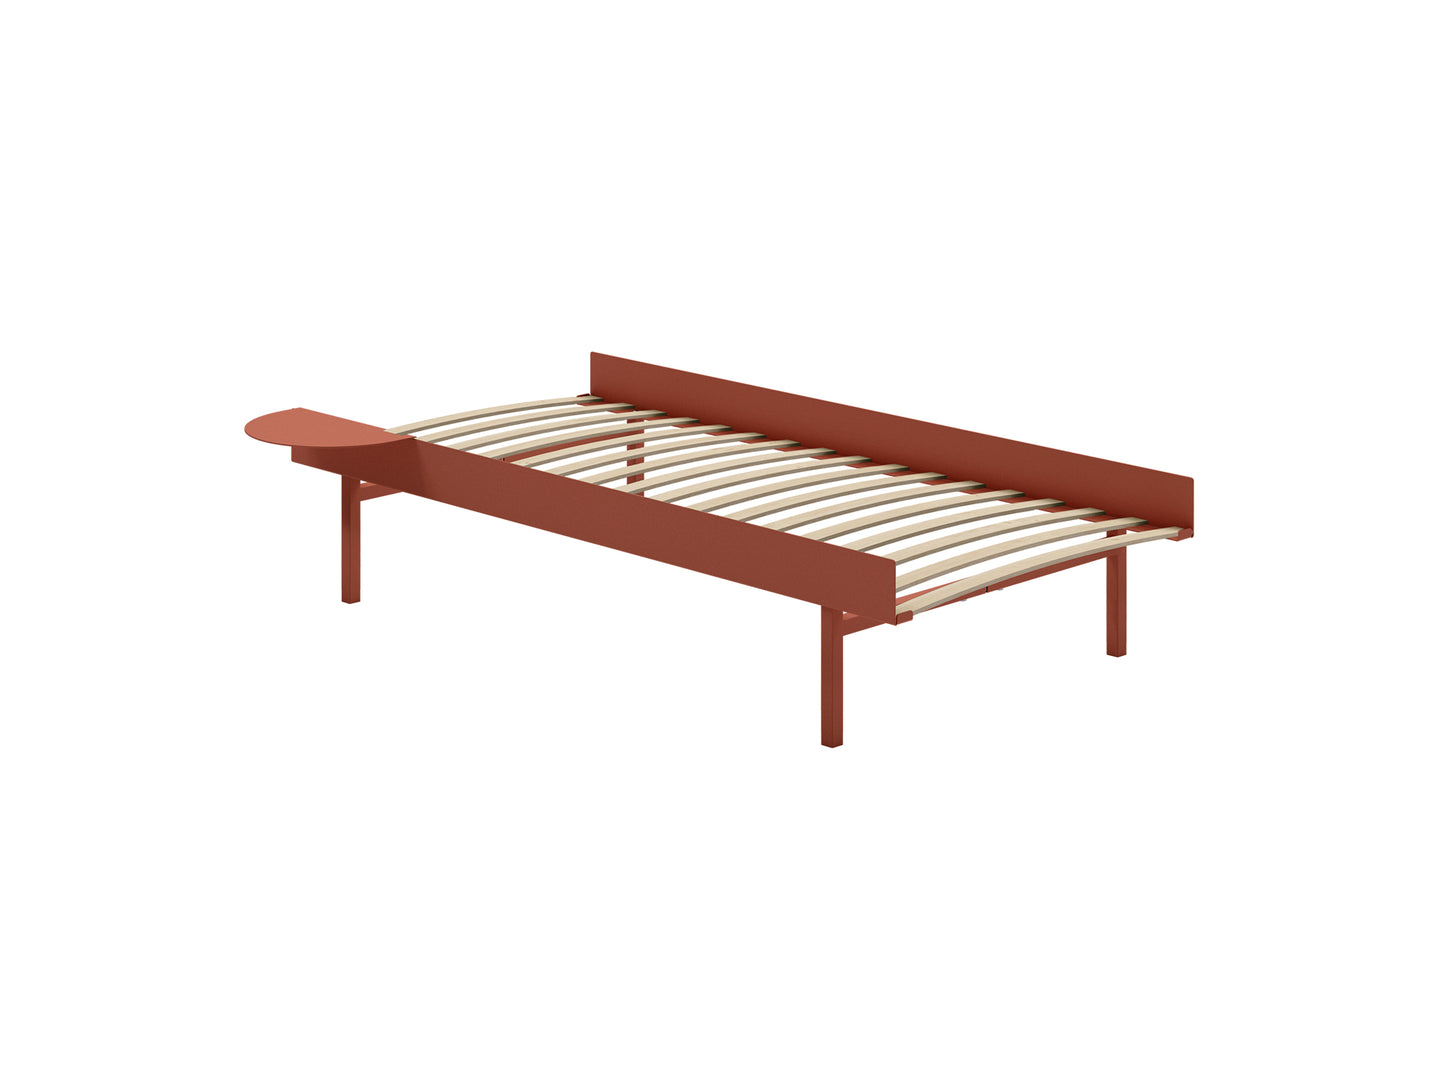 Bed 90 - 180 cm (High) by Moebe- Bed Frame / with 90cm wide Slats /  1 Side Table / Terracotta